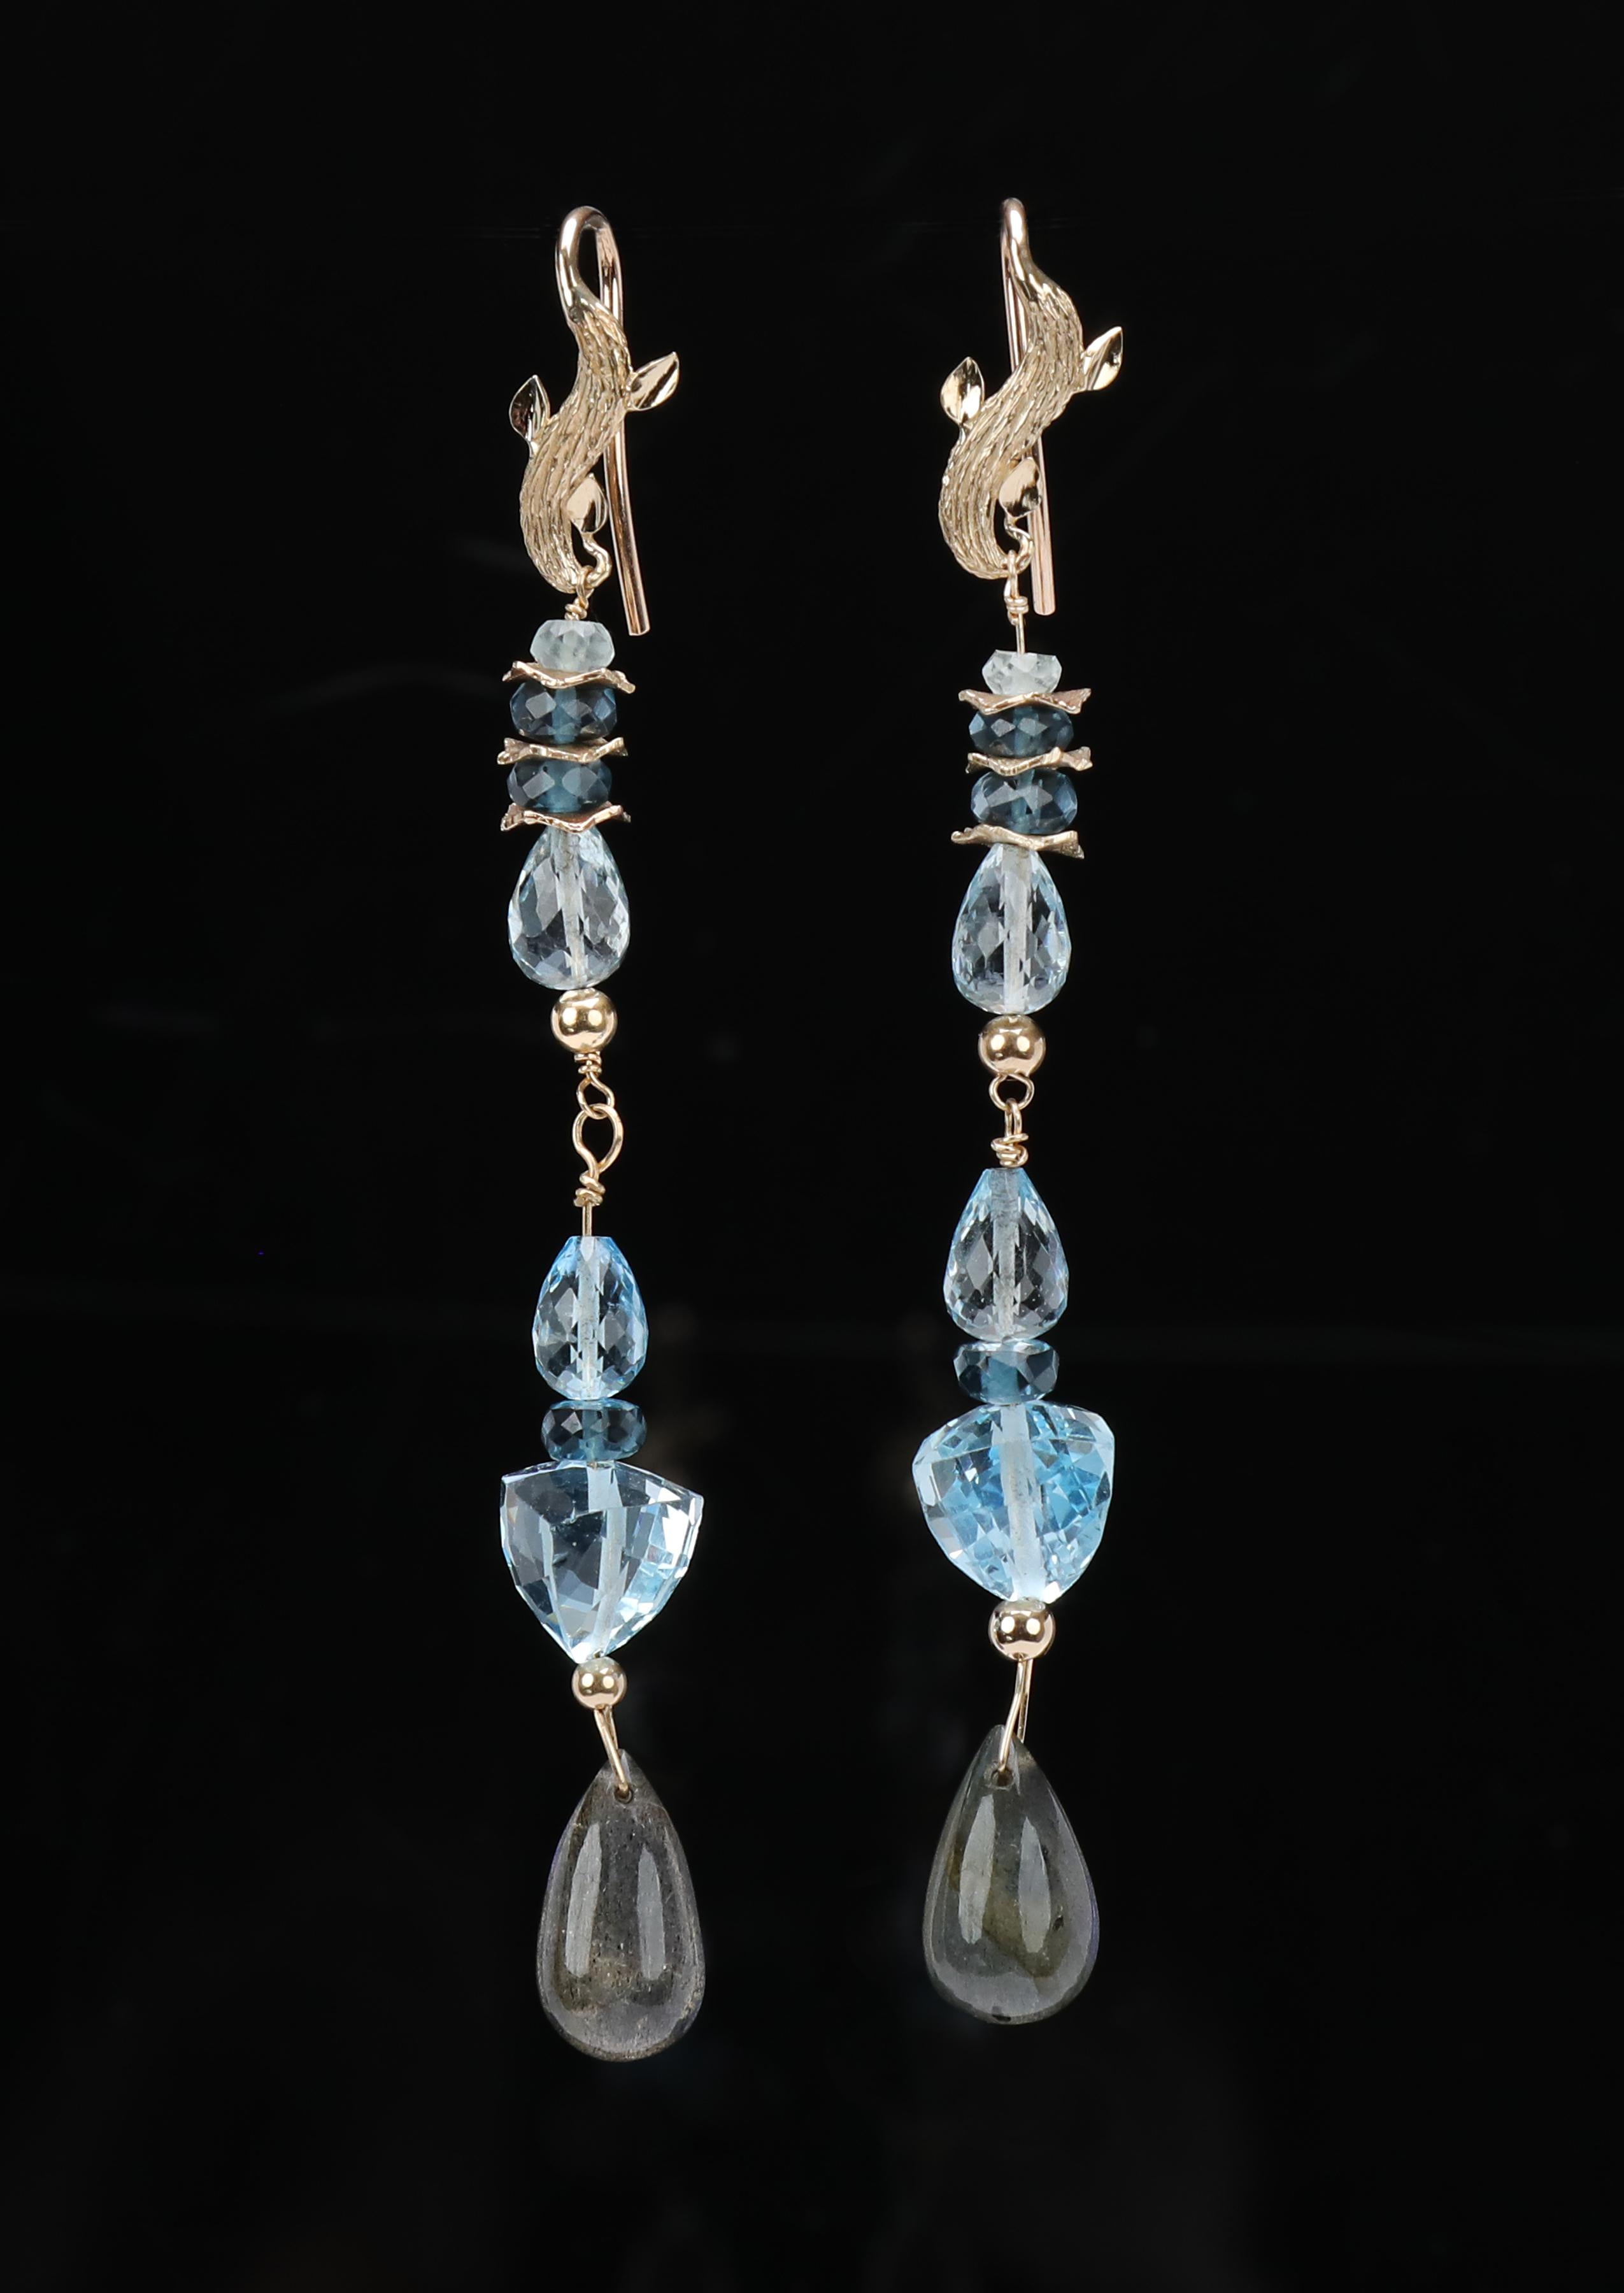 Sky and London Blue Topaz, and Labradorite cascade from our custom ear wire to create an amazing column of mixed shaped gems ending in flashing labradorite. “Azure Day” proves it is possible to dress up and down with great jewelry.  “Azure Day”